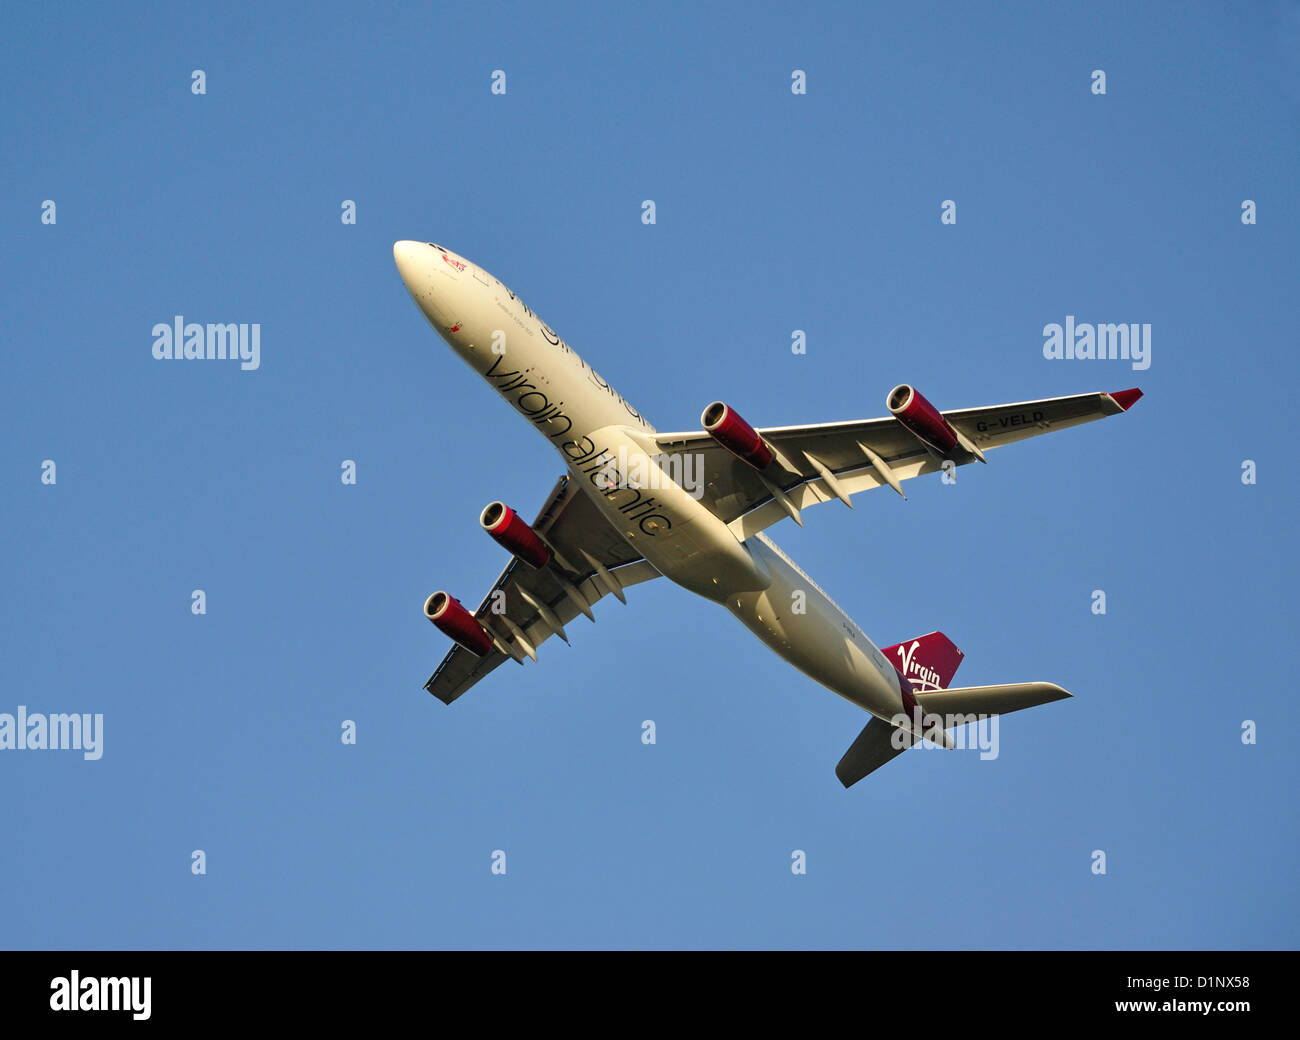 Virgin Atlantic Airbus A340-300 taking off from Heathrow Airport, Greater London, England, United Kingdom Stock Photo